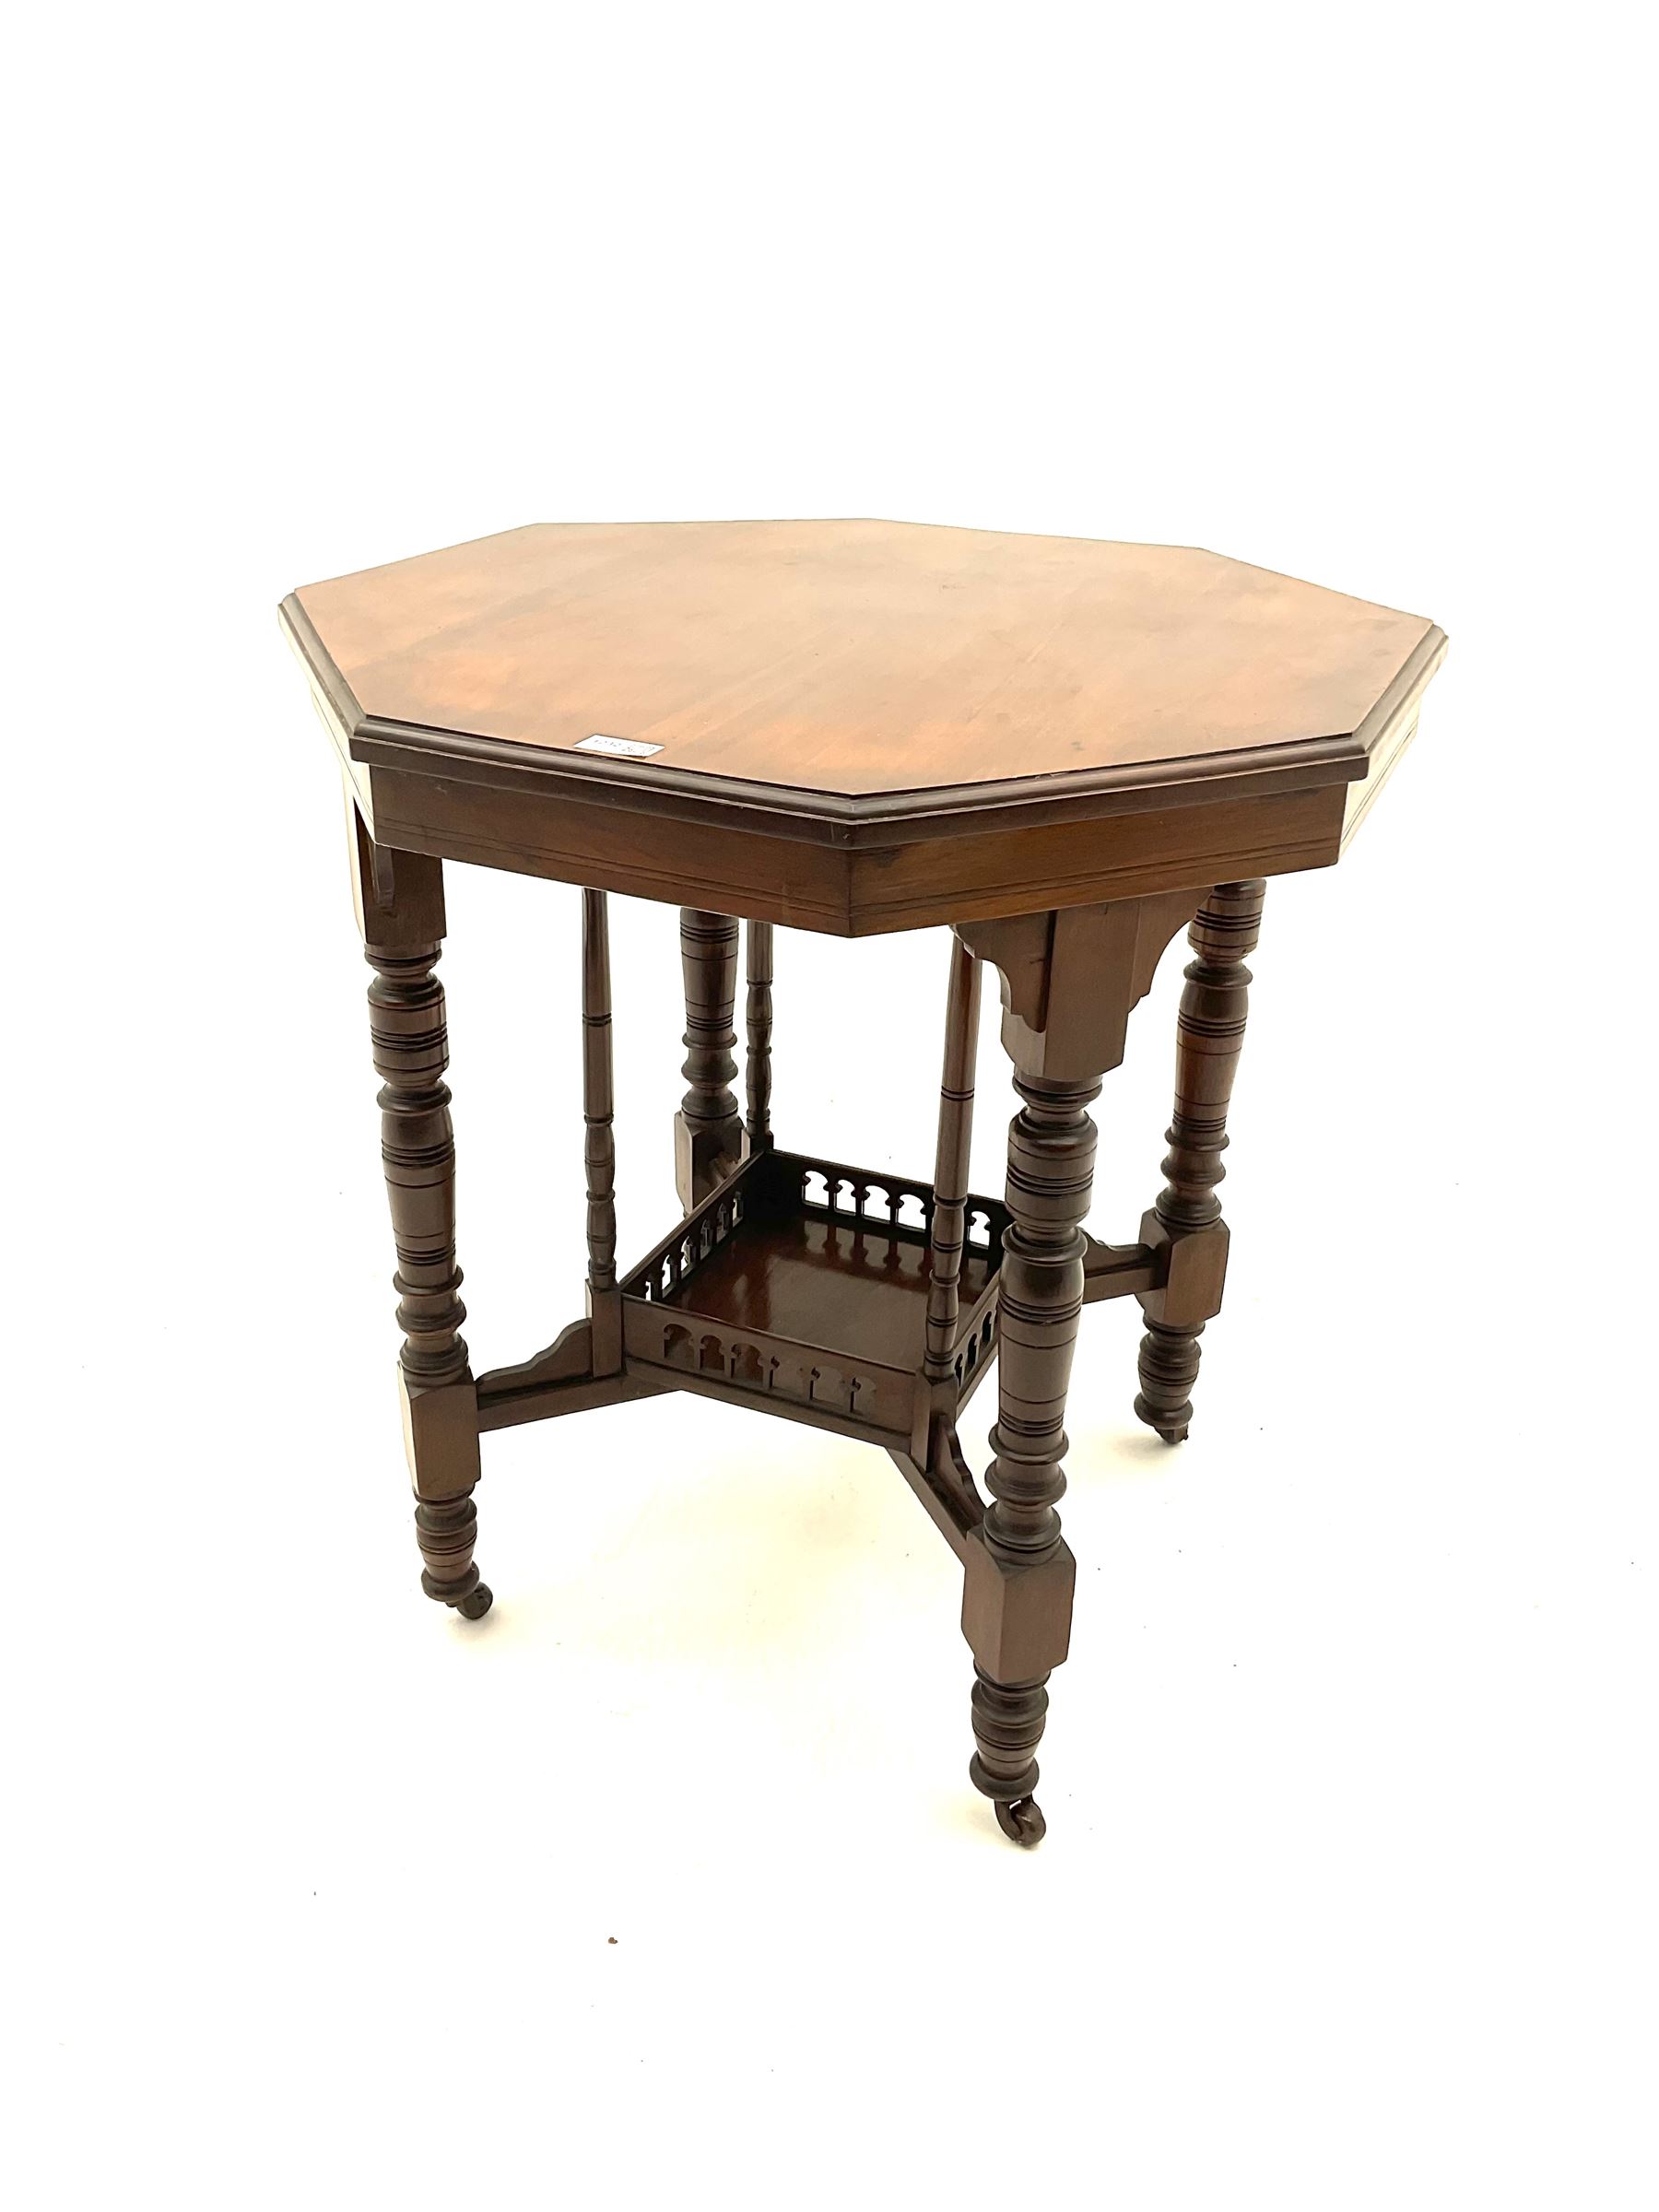 Early 20th century walnut octagonal occasional table